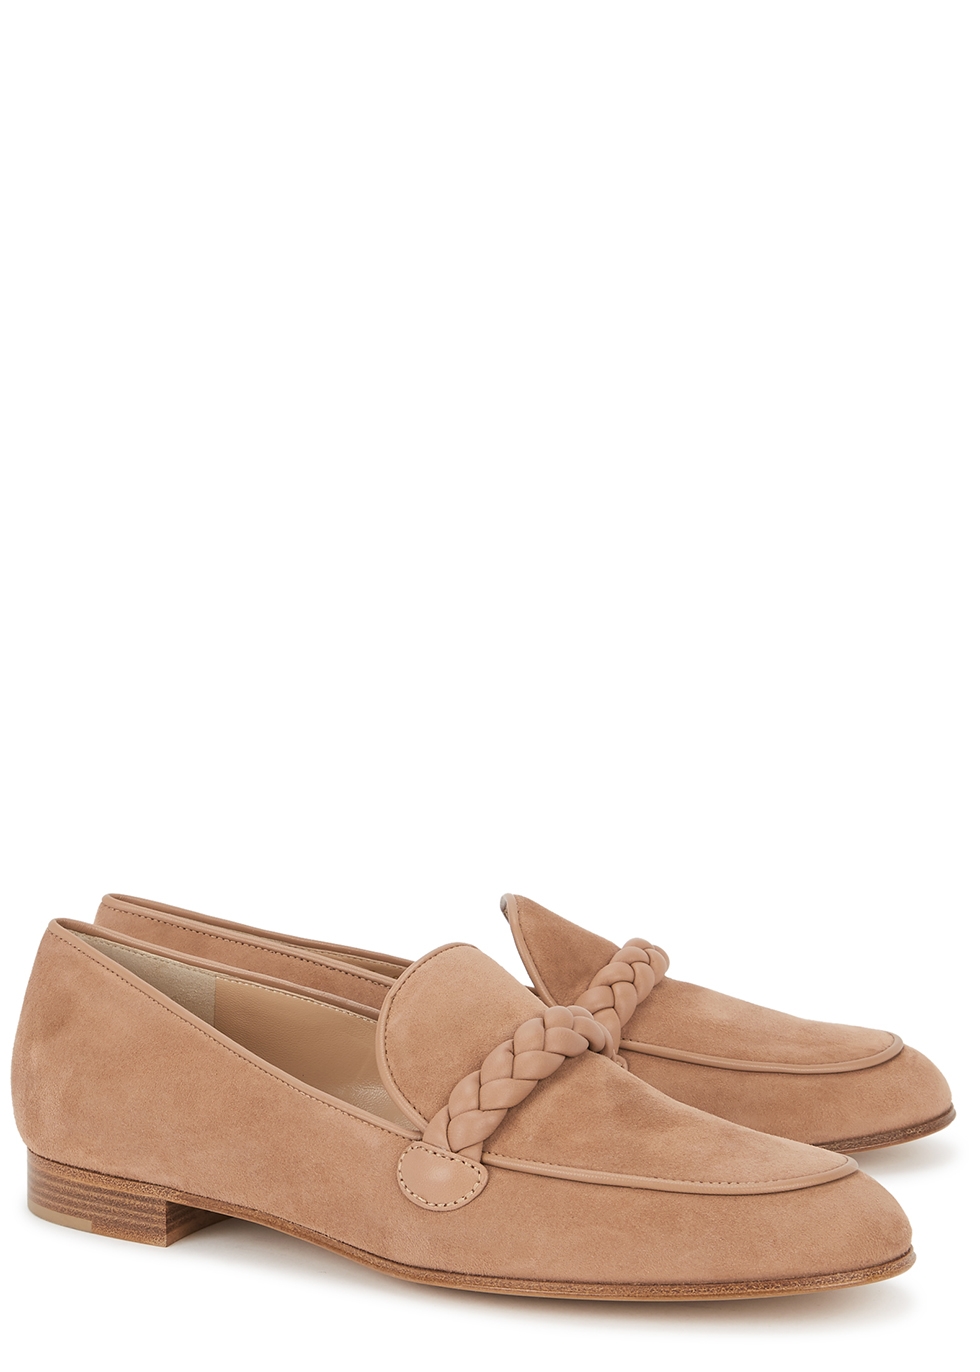 Gianvito Rossi Dusky pink suede loafers 